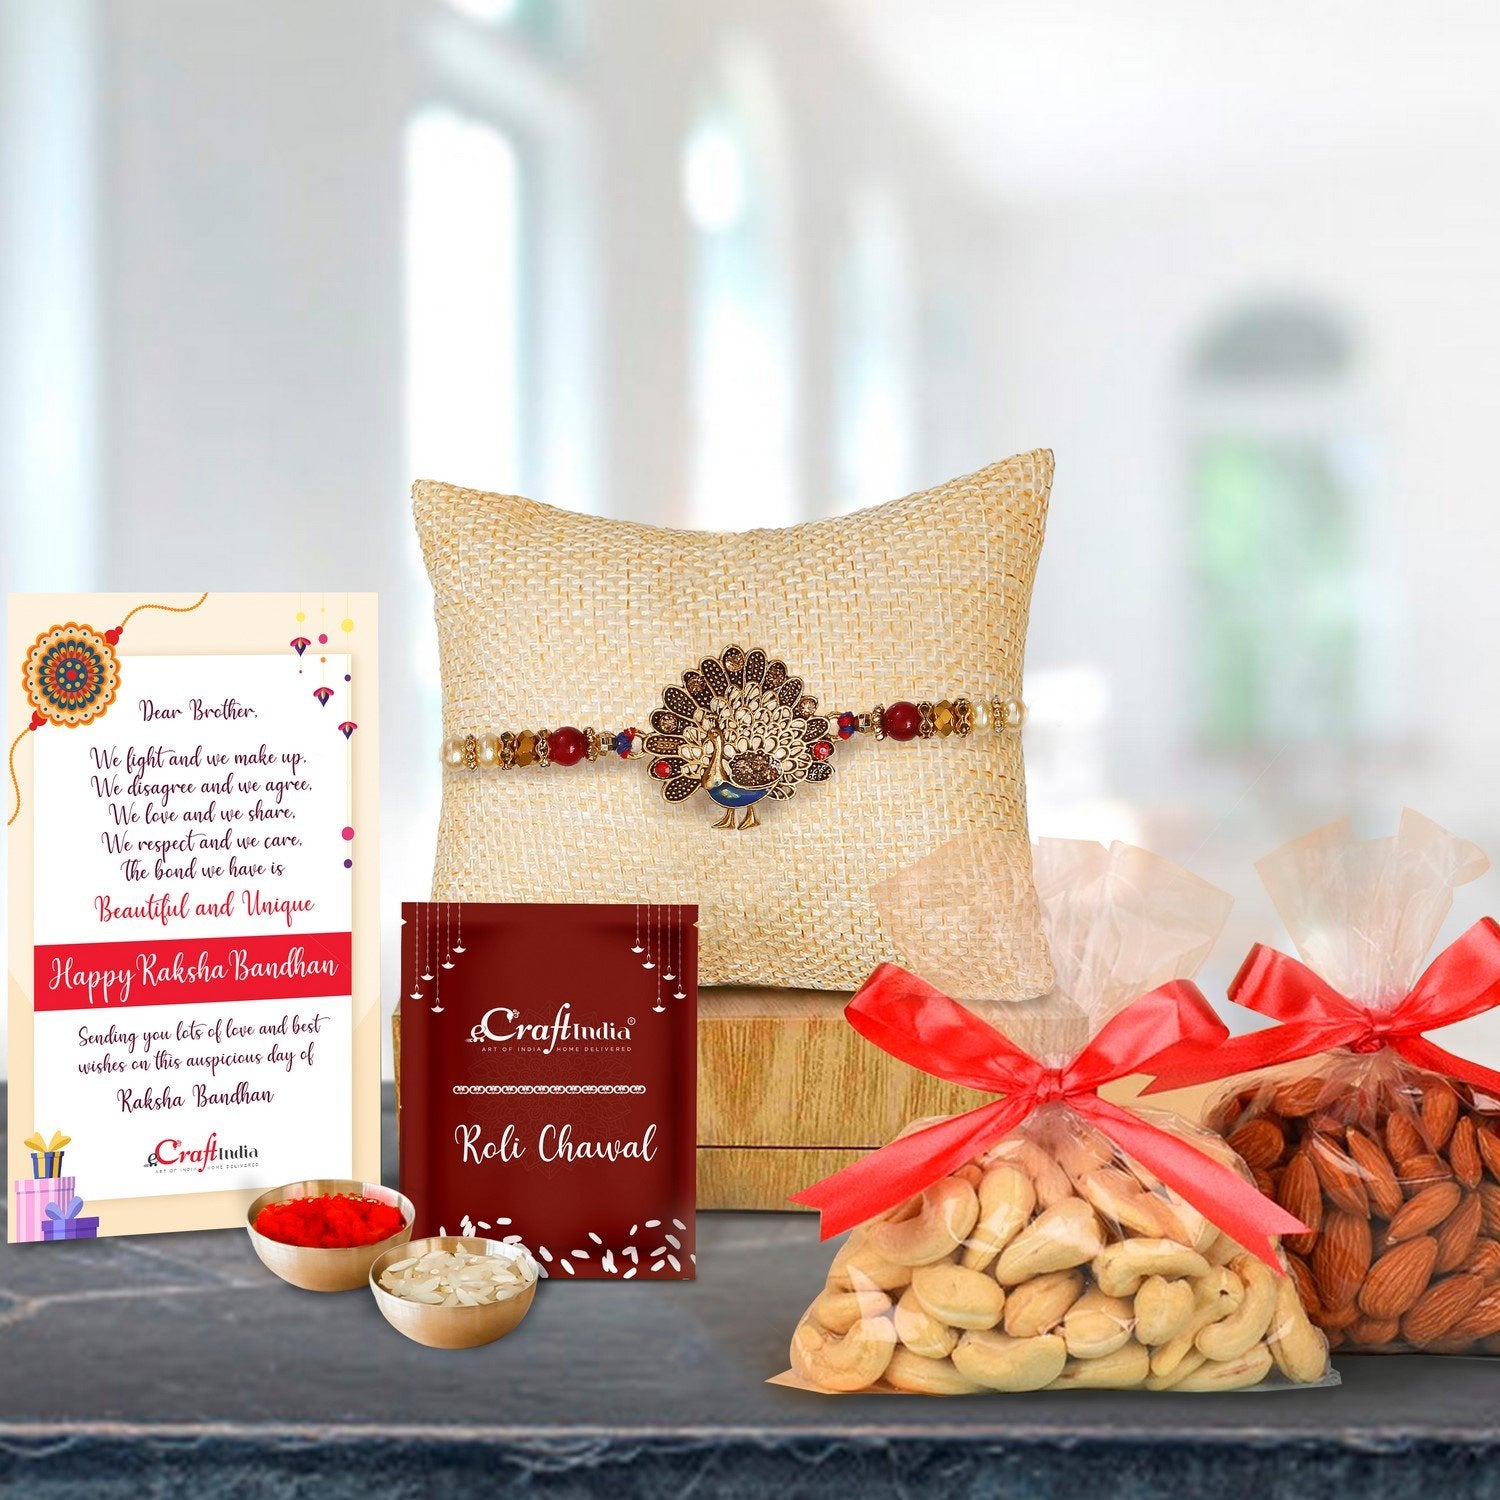 Designer Dancing Peacock Rakhi with Badam and Cashew (200 gm each, total 400 gm) and Roli Chawal Pack, Best Wishes Greeting Card